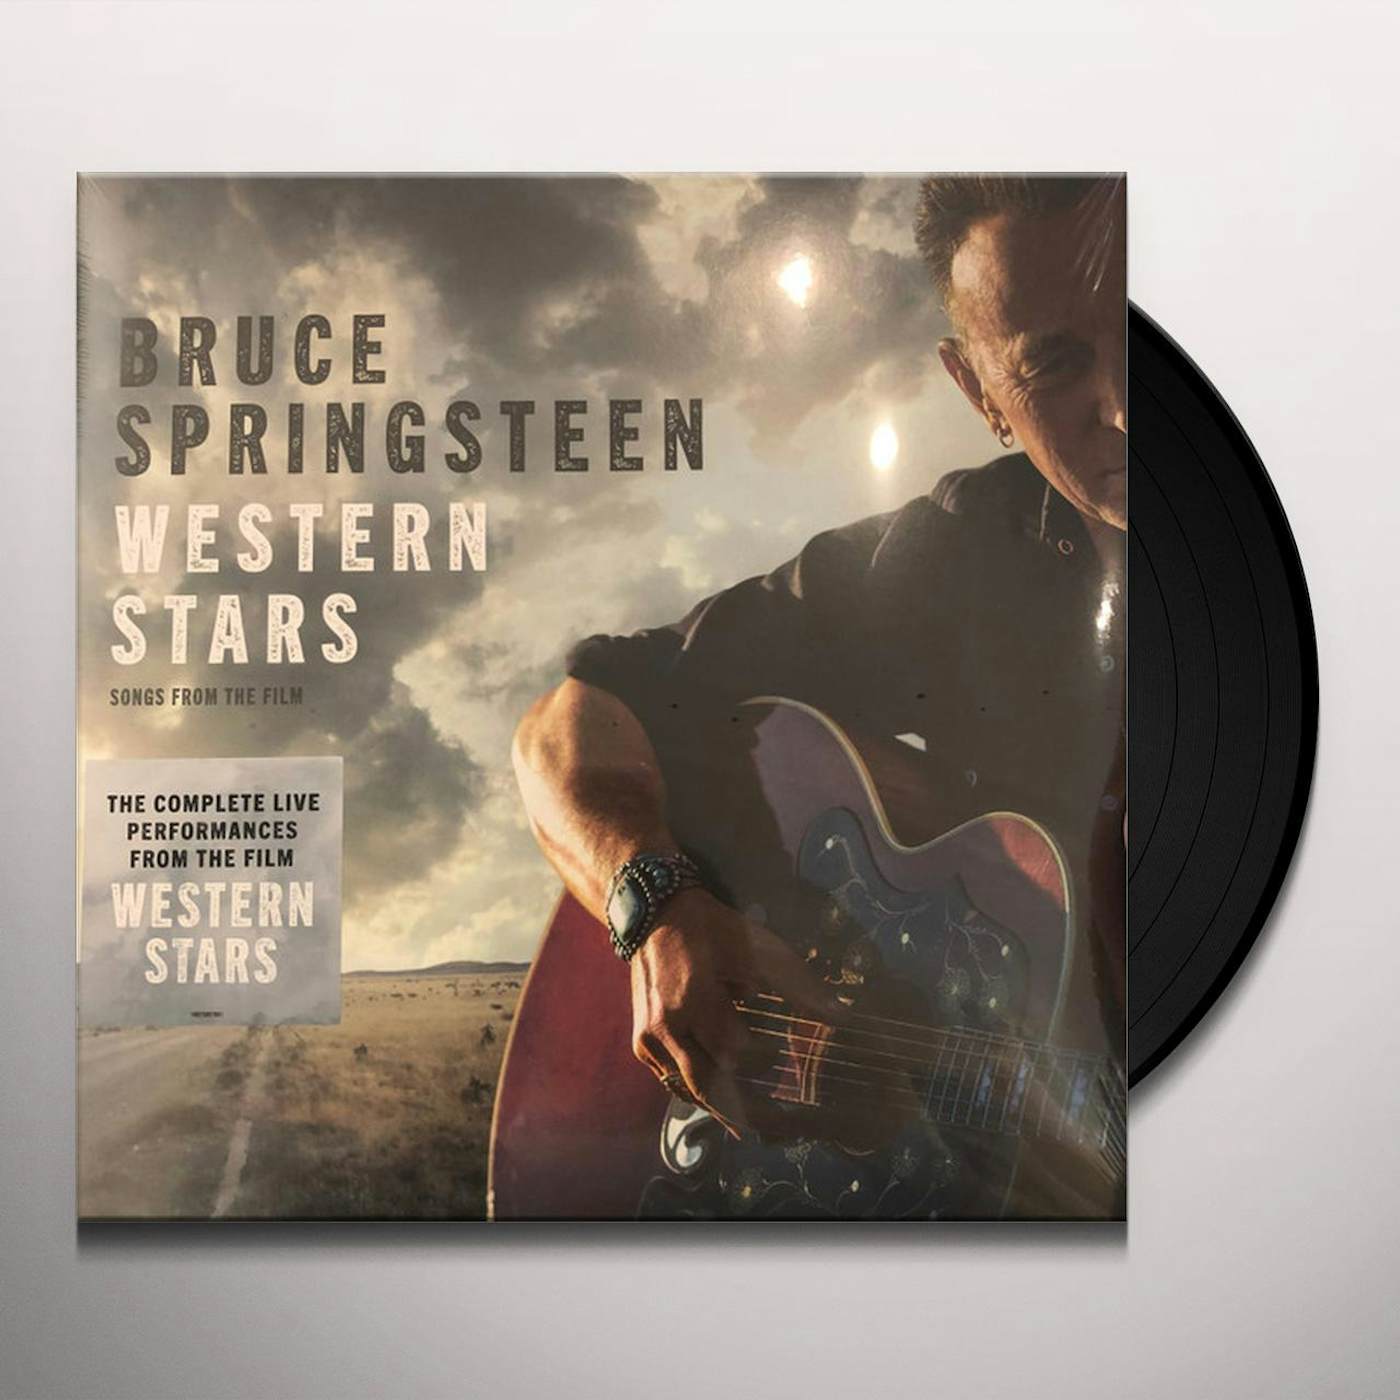 Bruce Springsteen WESTERN STARS - SONGS FROM THE FILM (2LP/140G) Vinyl Record